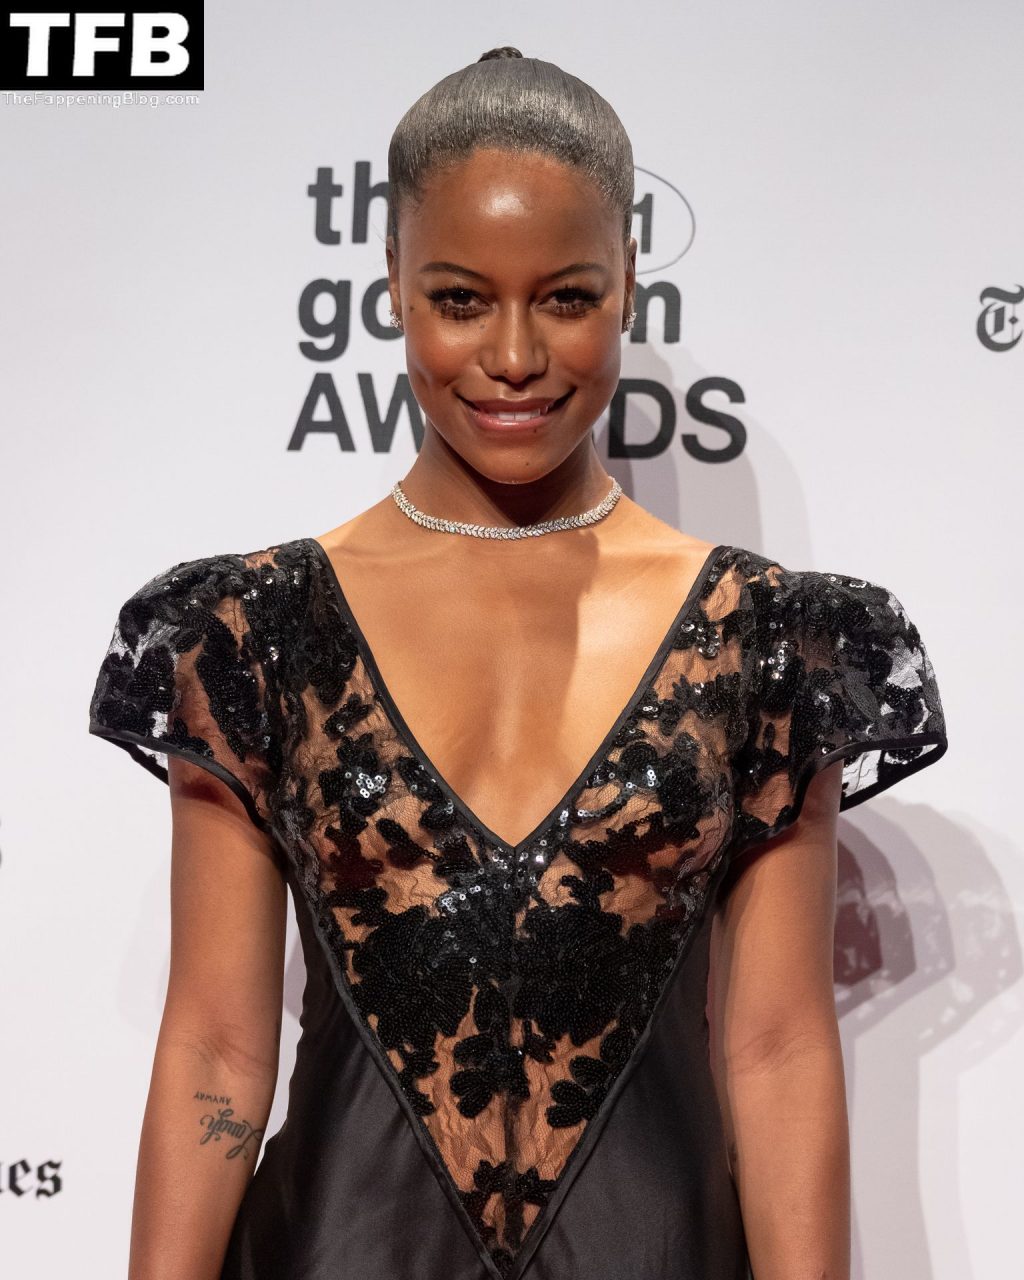 Taylour Paige Looks Hot in a See-Through Dress at the 2021 Gotham Awards (4 Photos)